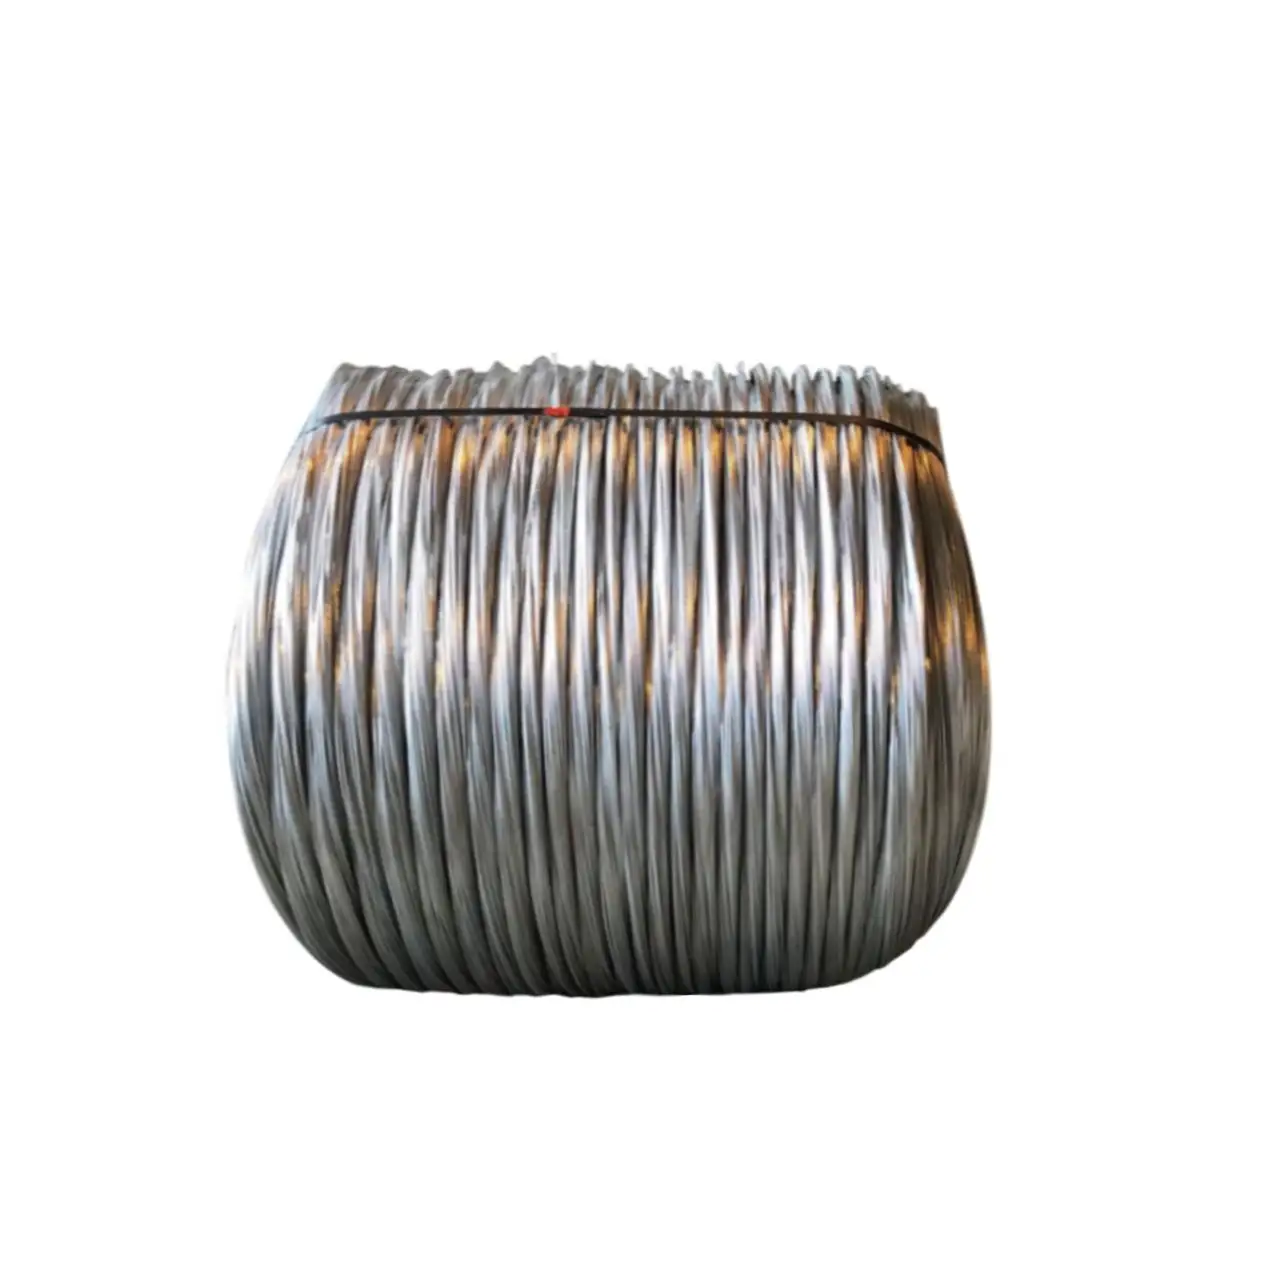 Top quality Italian zinc aluminium steel wire for netting applications and protection systems worldwide